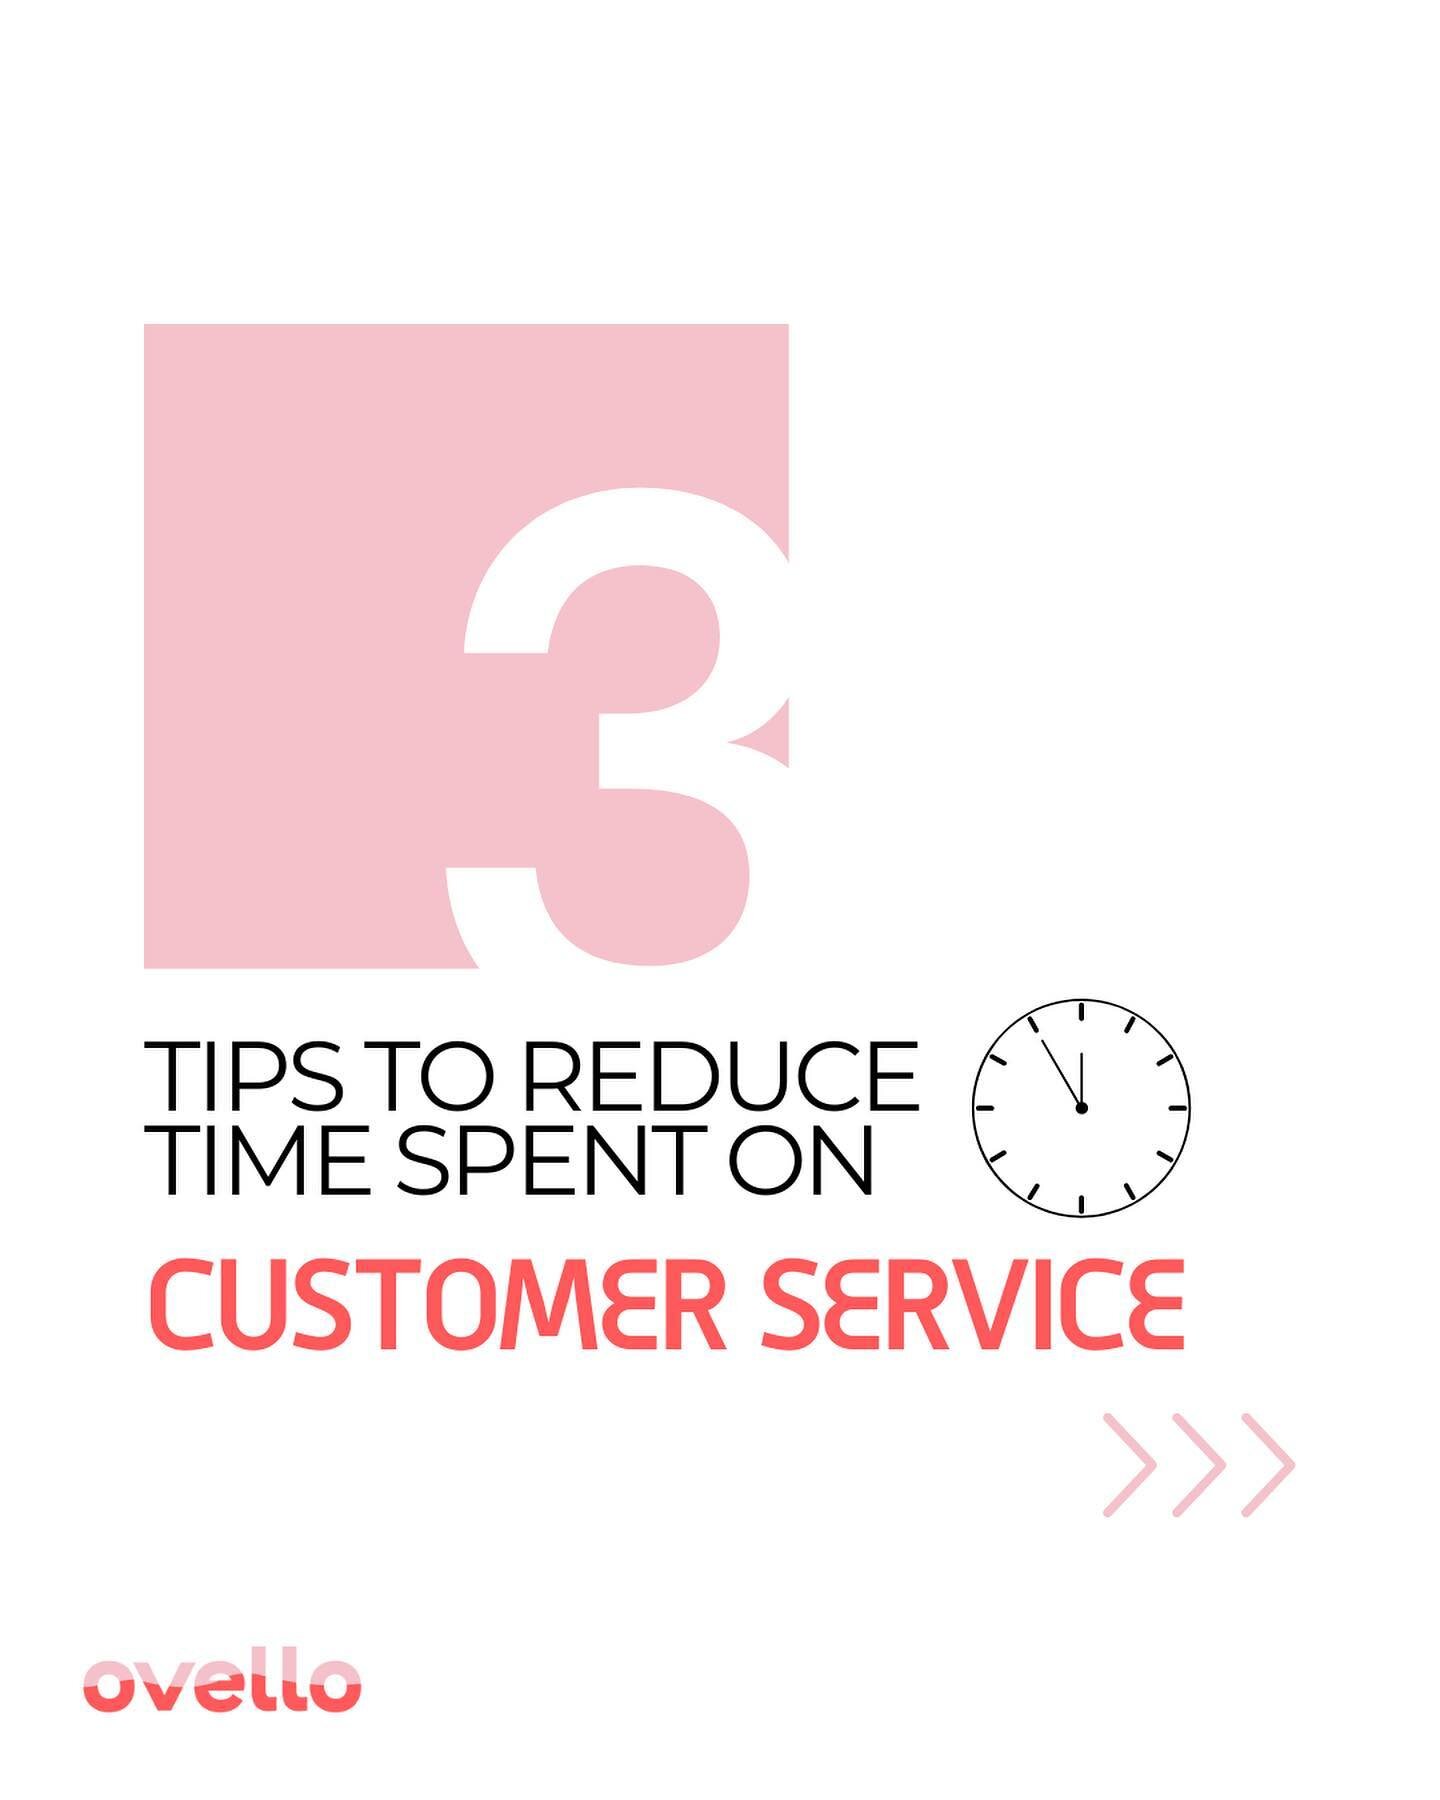 Here's how to reduce time spent on customer service ⏰ 

Customer service can consume a ton of our time but having great customer service is VITAL to a successful business!

How are your customers contacting you currently?
👉🏻Email
👉🏻DM's
👉🏻Inqui